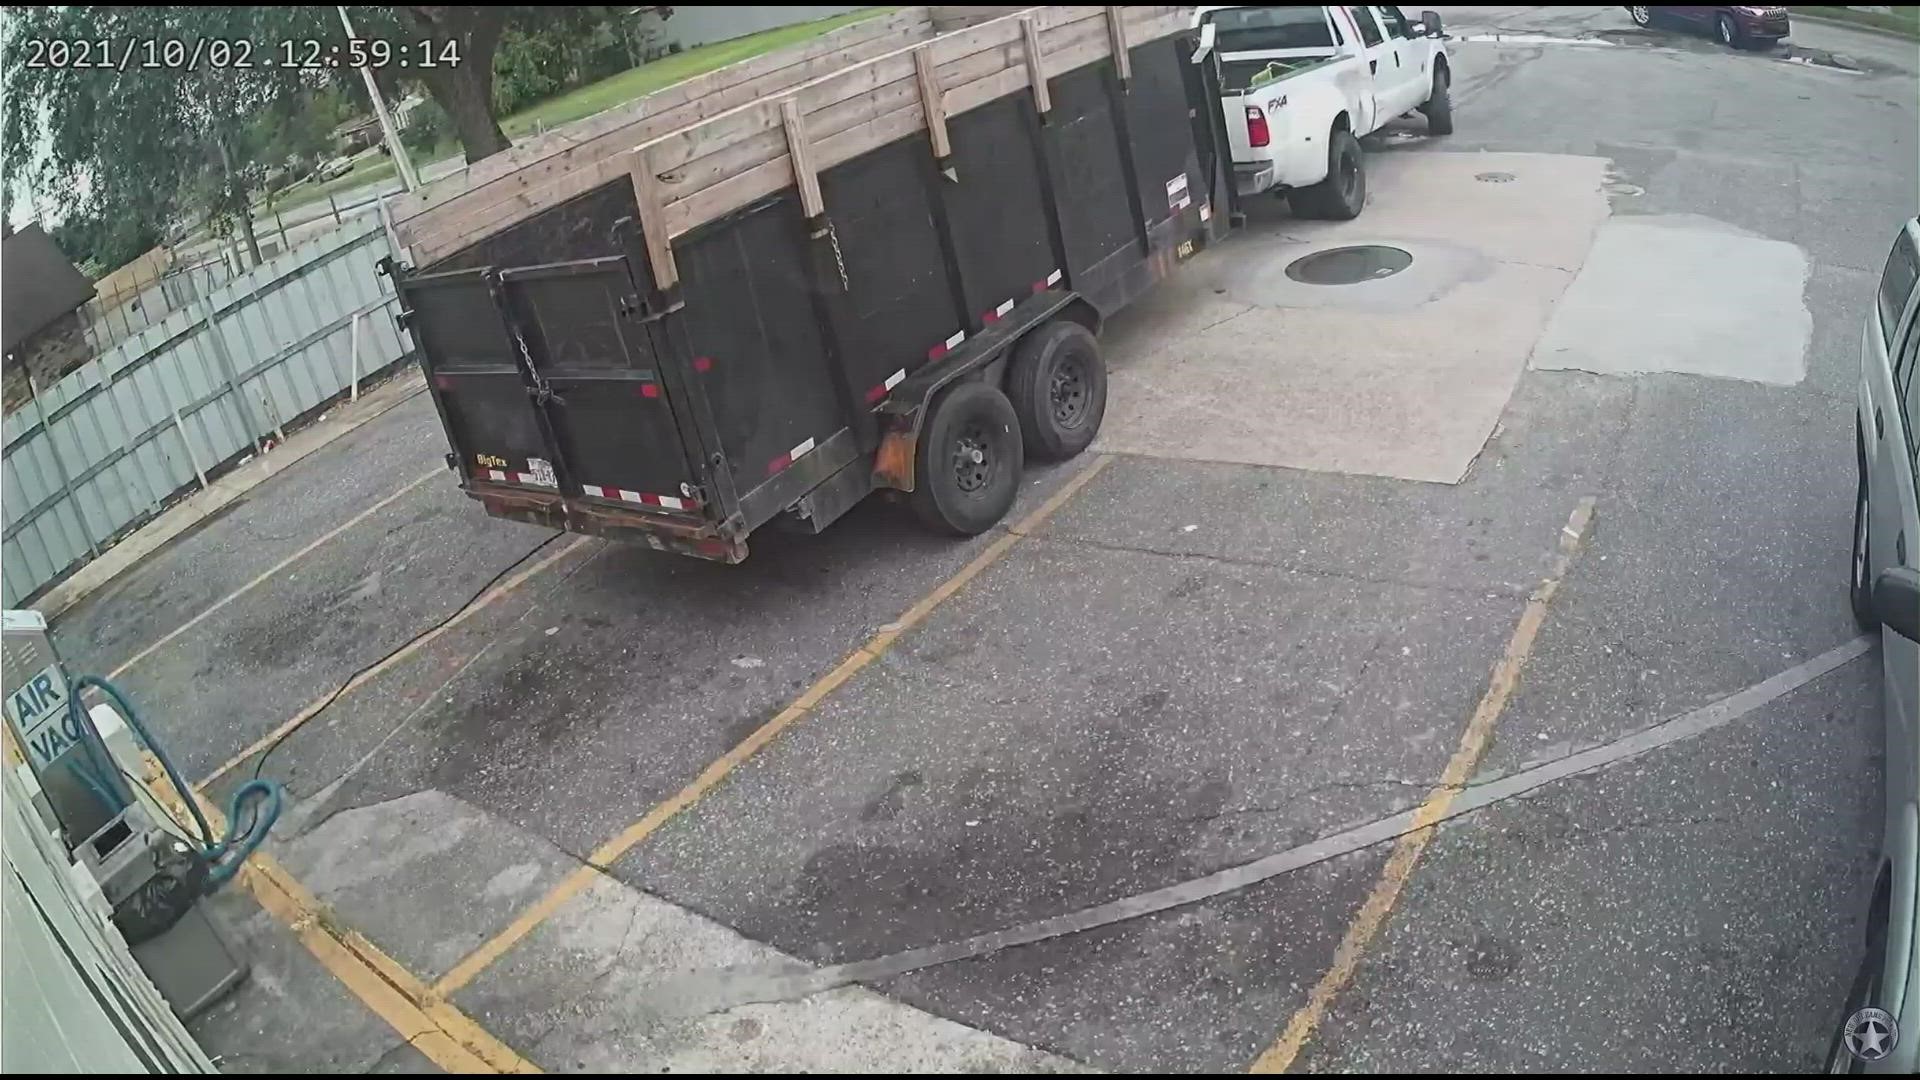 Police are searching for the man caught on camera stealing this truck on Oct. 2, 2021 at about 7:53 a.m. in the 4900 block of Gen. Meyer Ave.